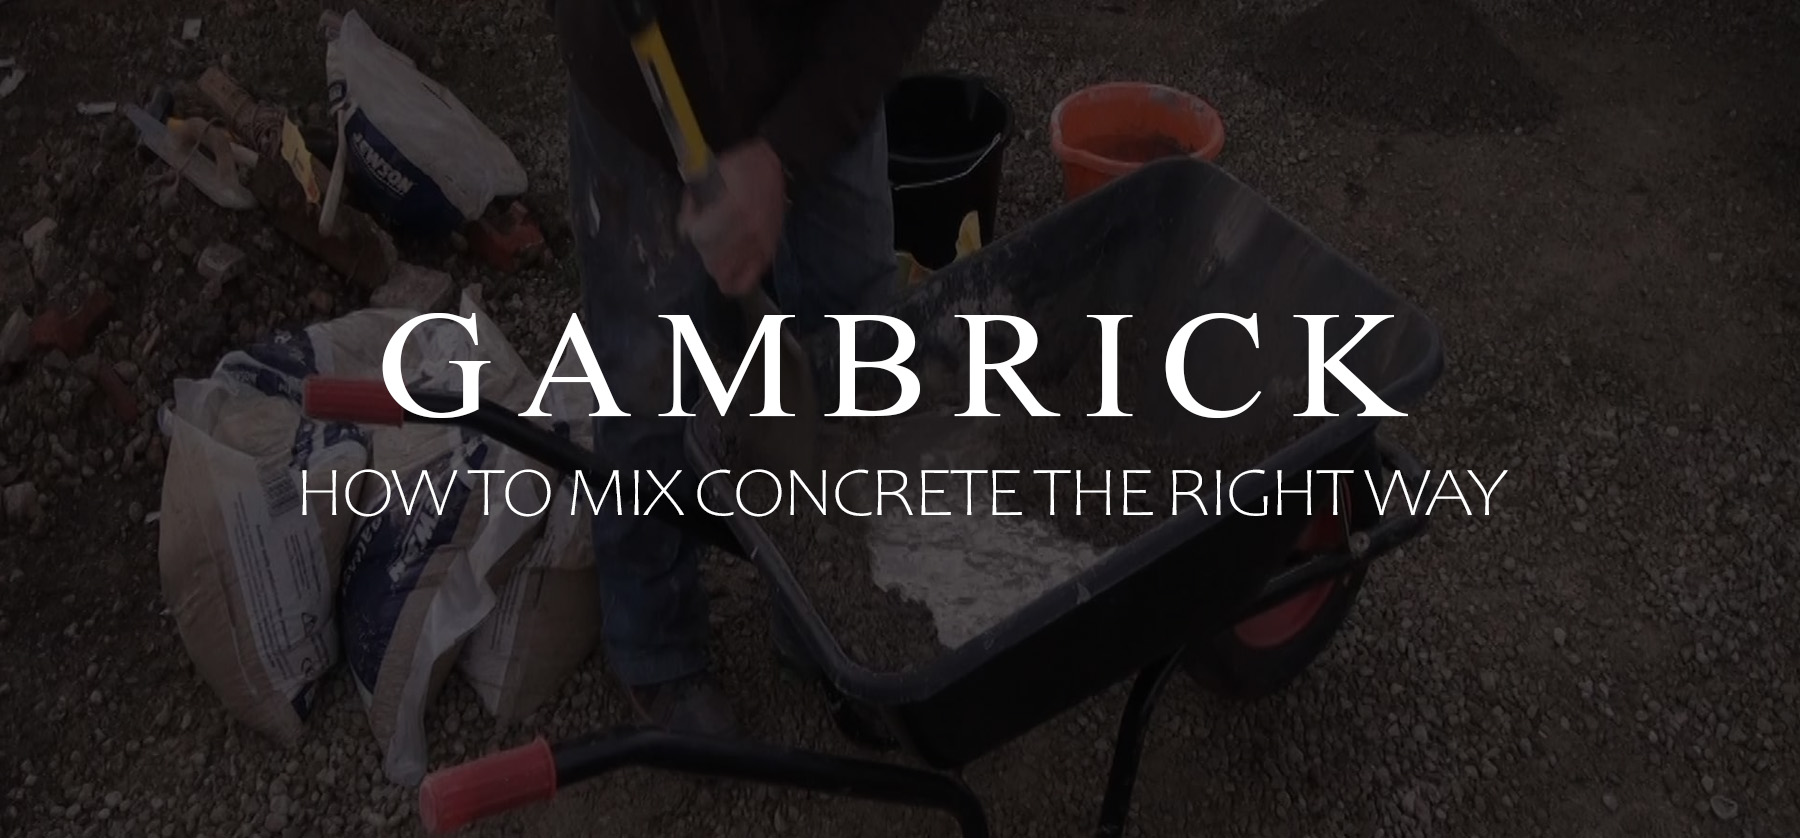 how to mix concrete the right way banner pic